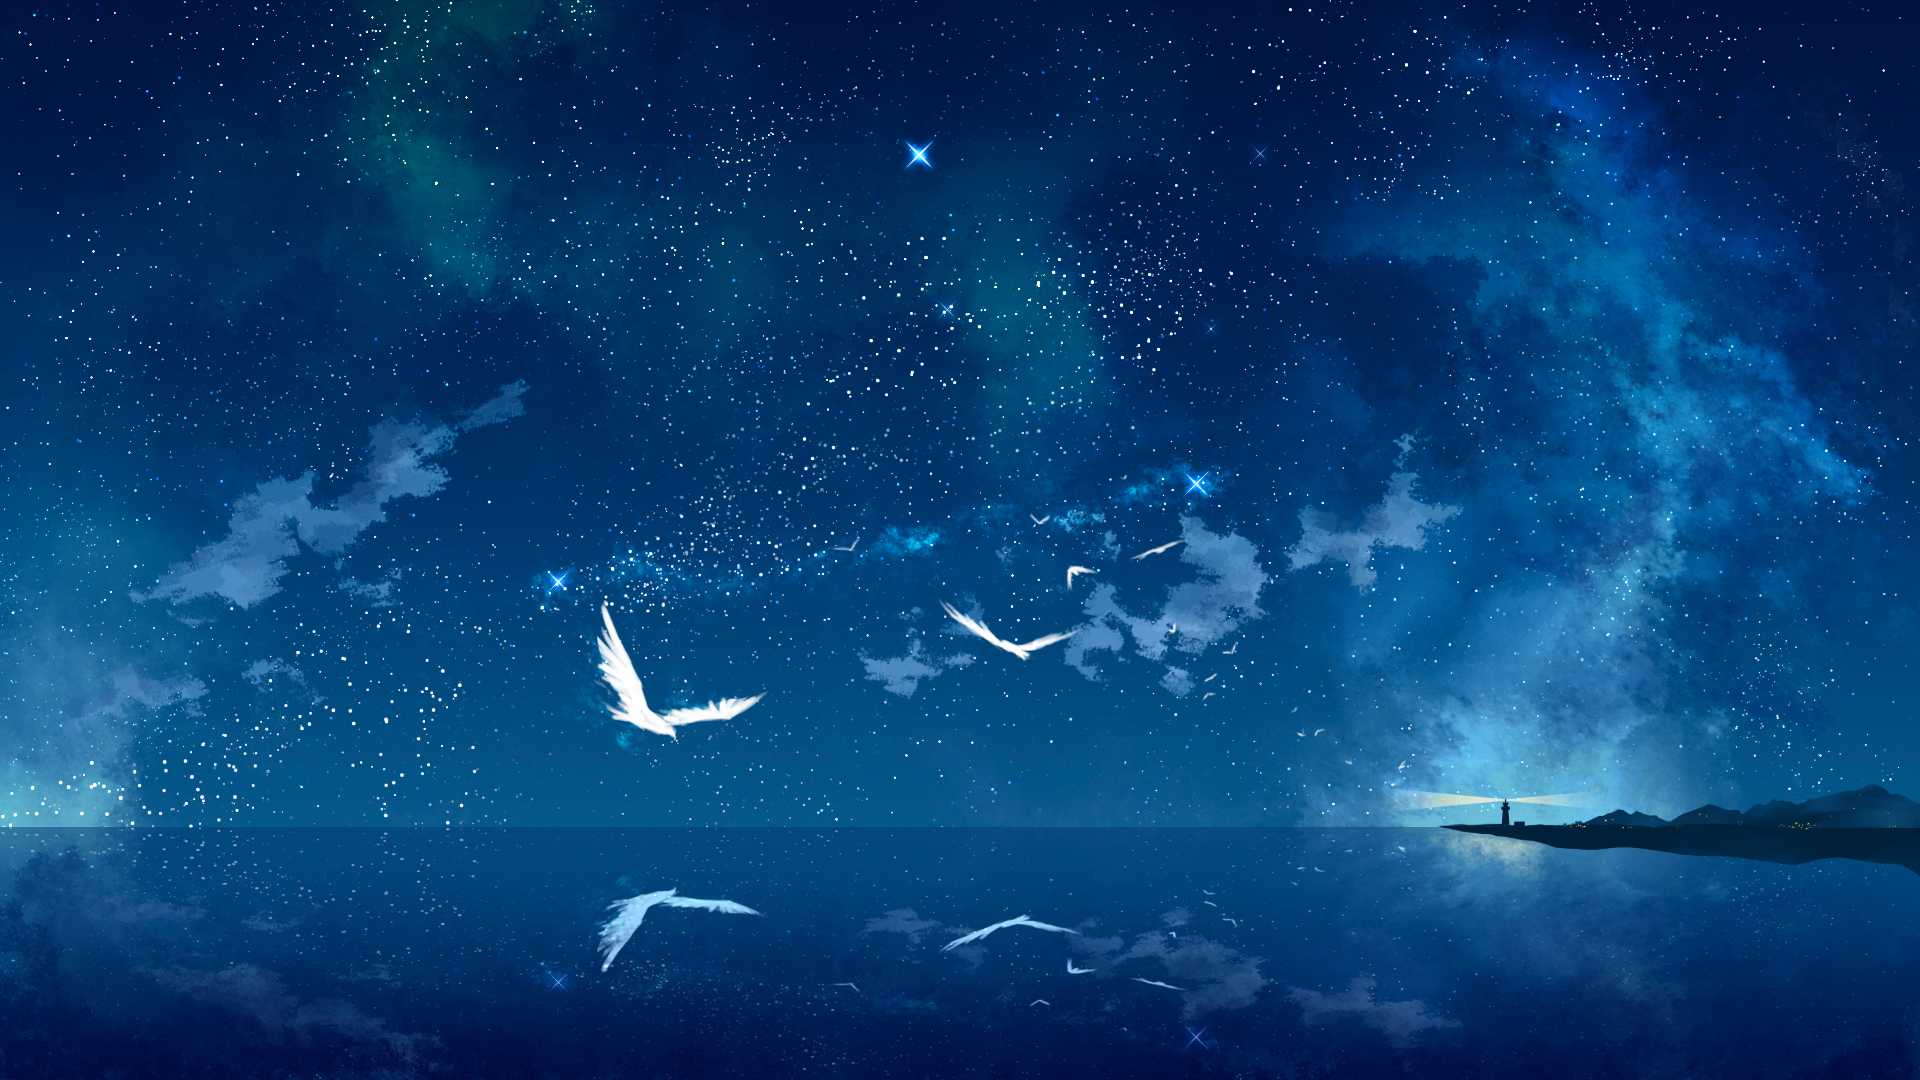 140+ Anime Landscape HD Wallpapers and